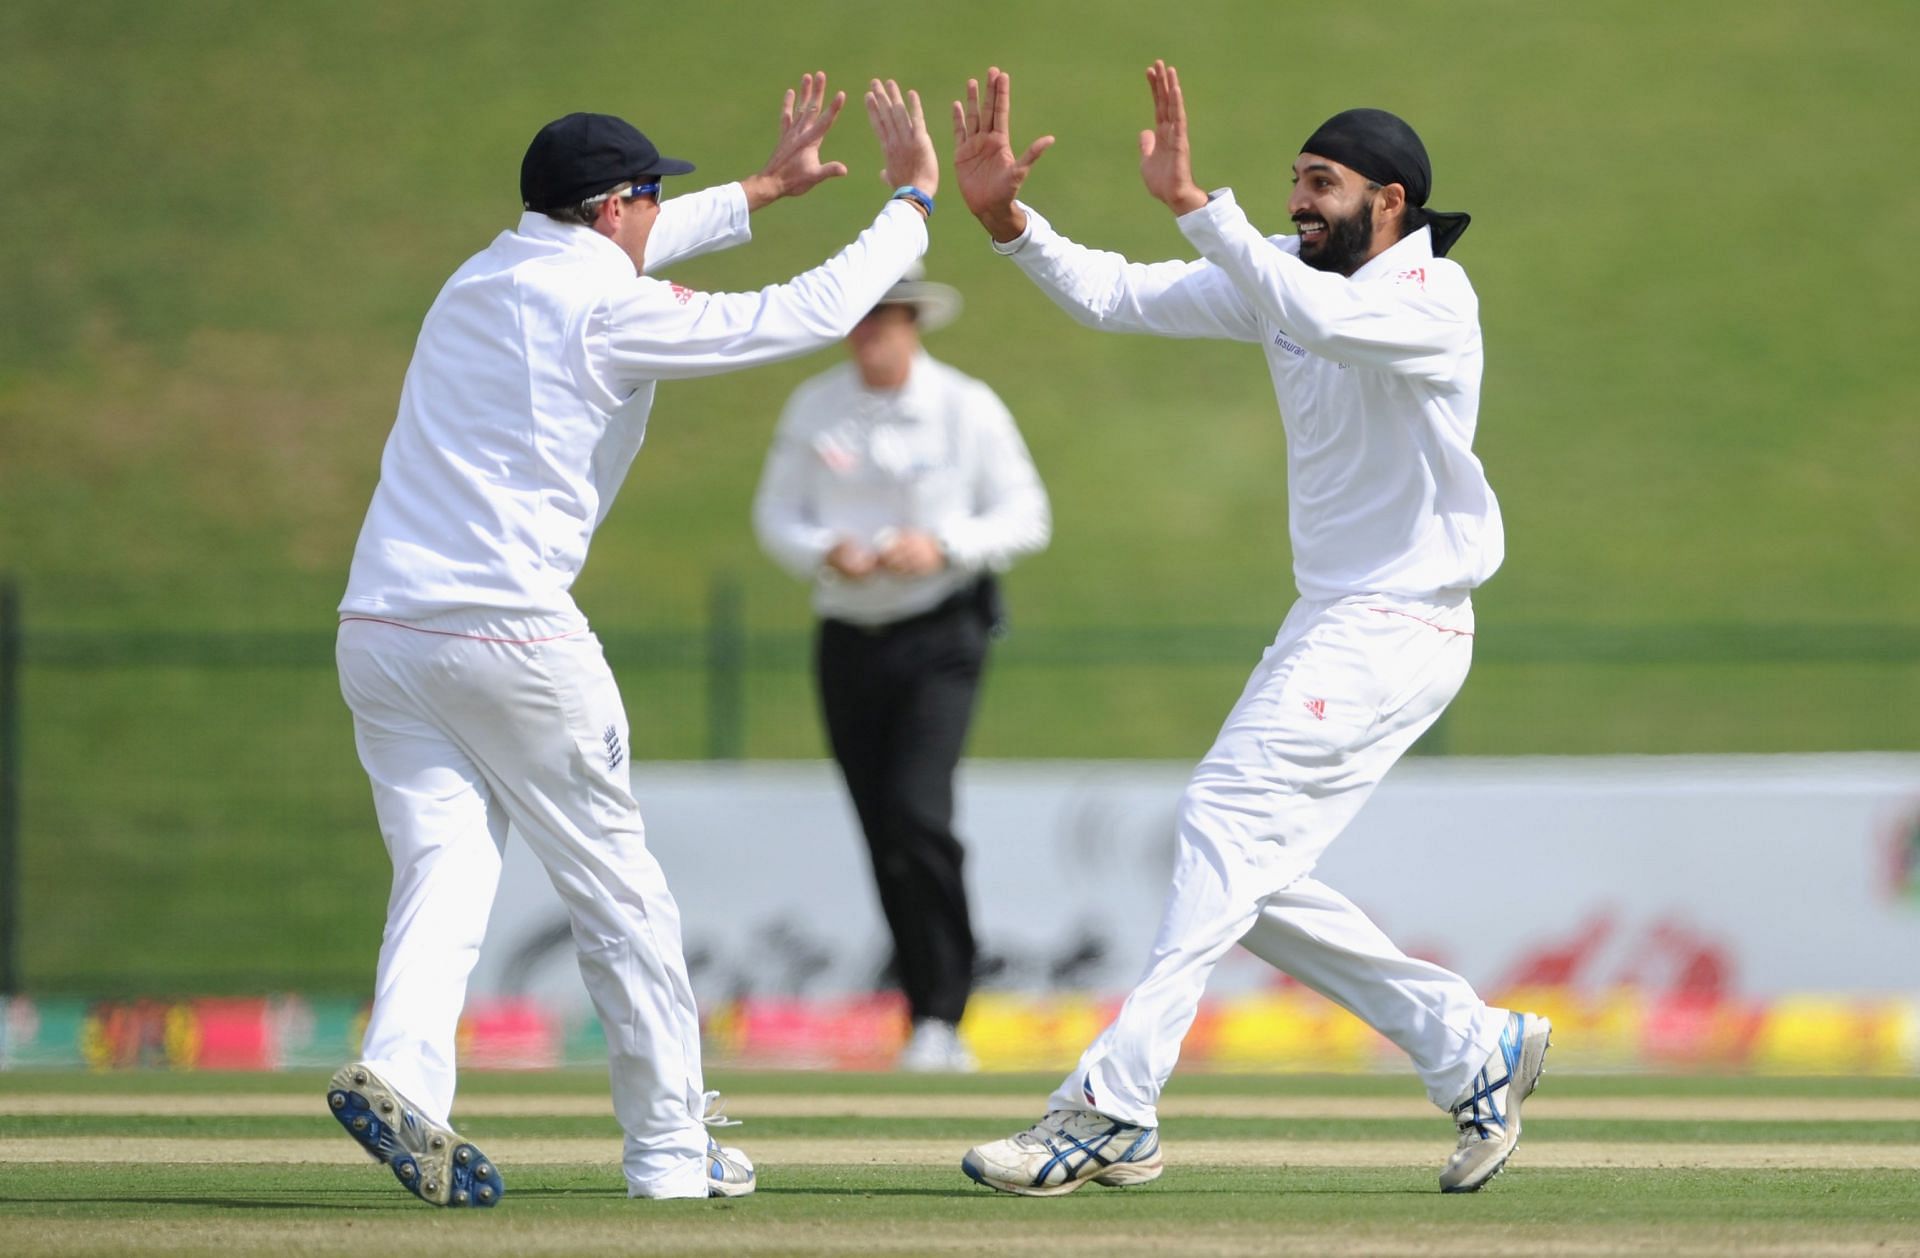 Graeme Swann (left) and Monty Panesar outshone the Indian spinners in the 2012 series. (Pic: Getty Images)